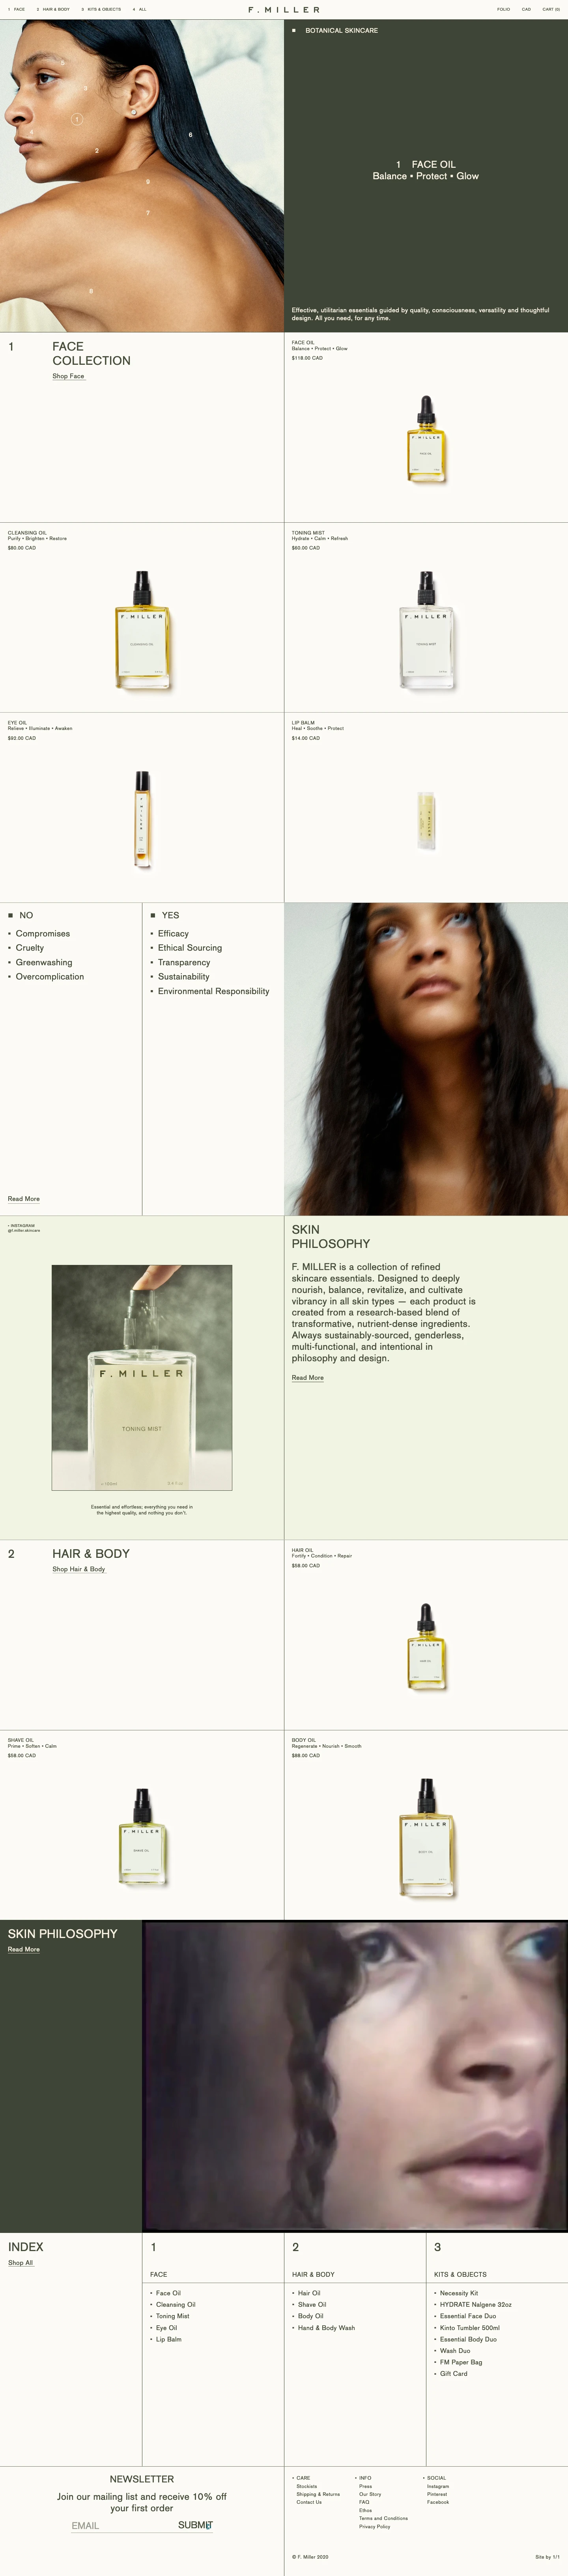 F. Miller Skincare Landing Page Example: Effective, uncompromising essentials guided by quality, consciousness, versatility and thoughtful design. All you need, for any time.